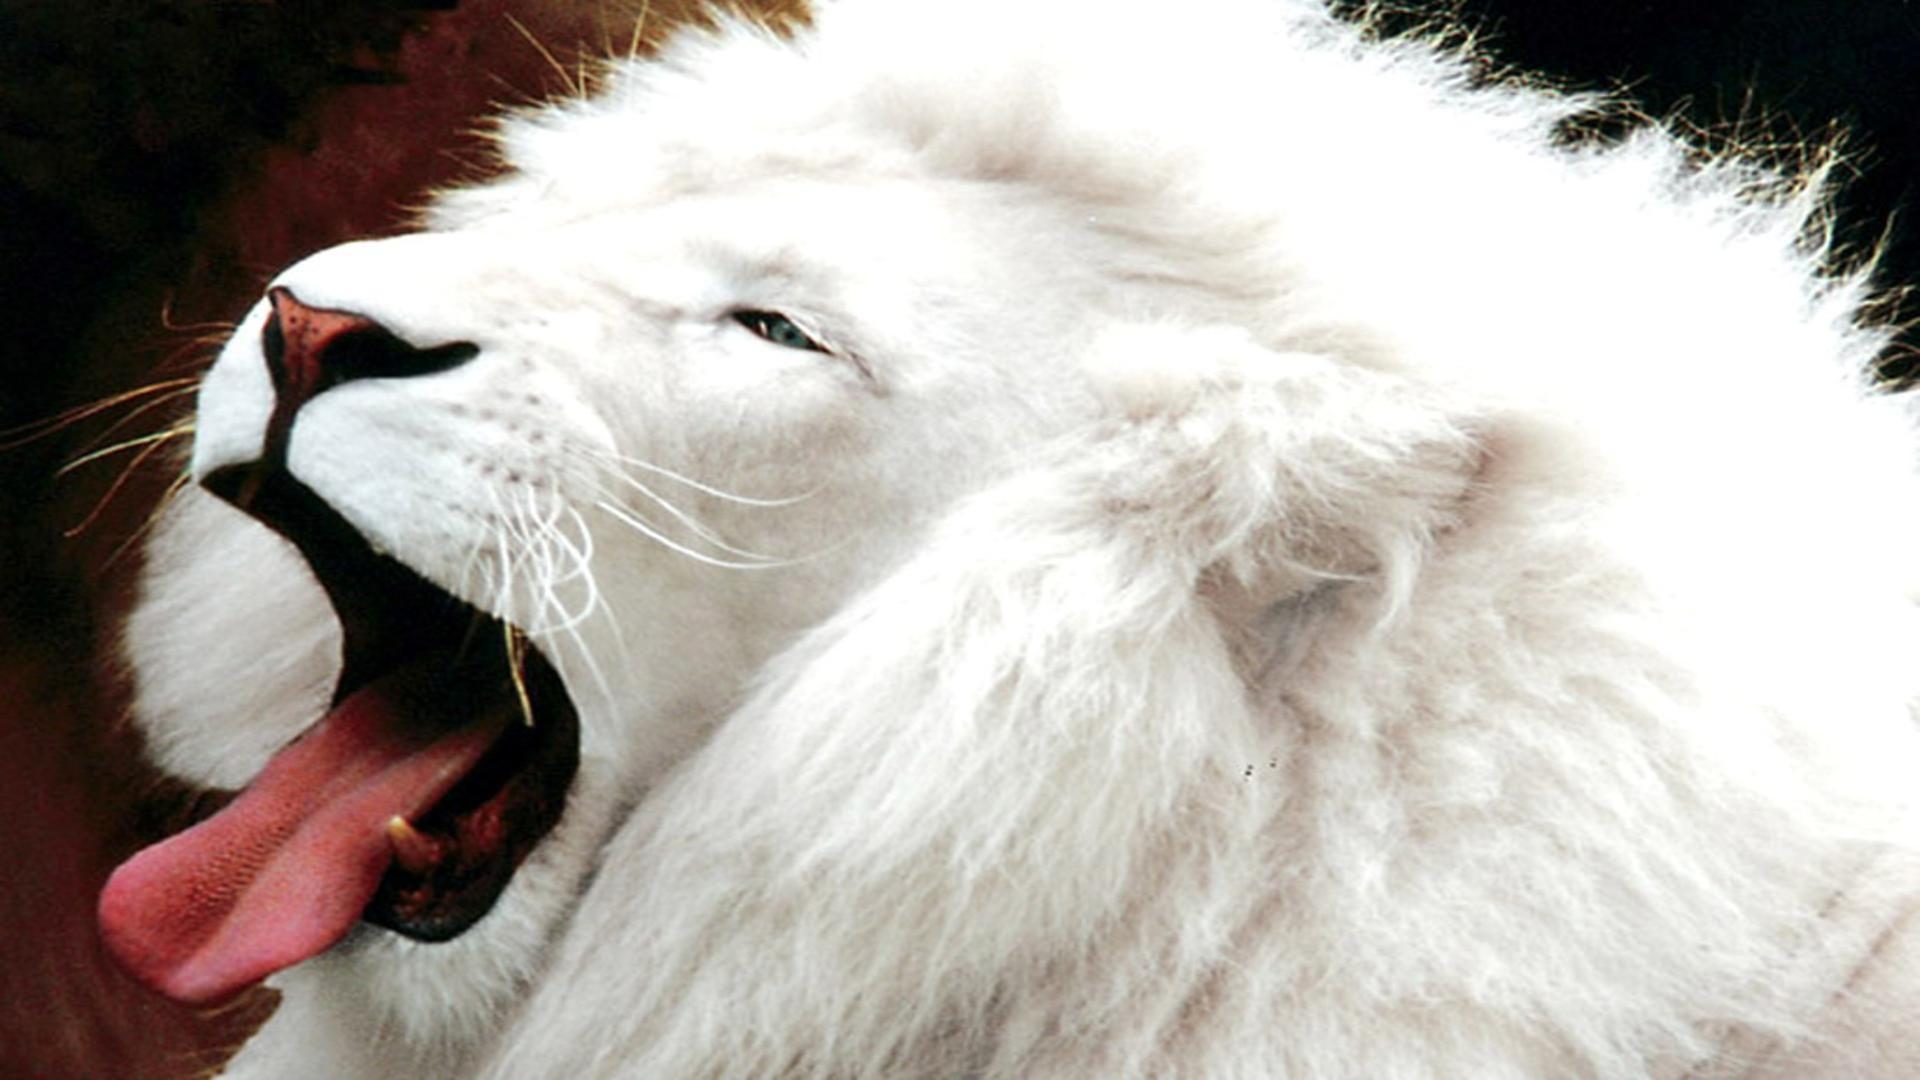 White Lion image 1080p Wallpaper. Beautiful image HD Picture